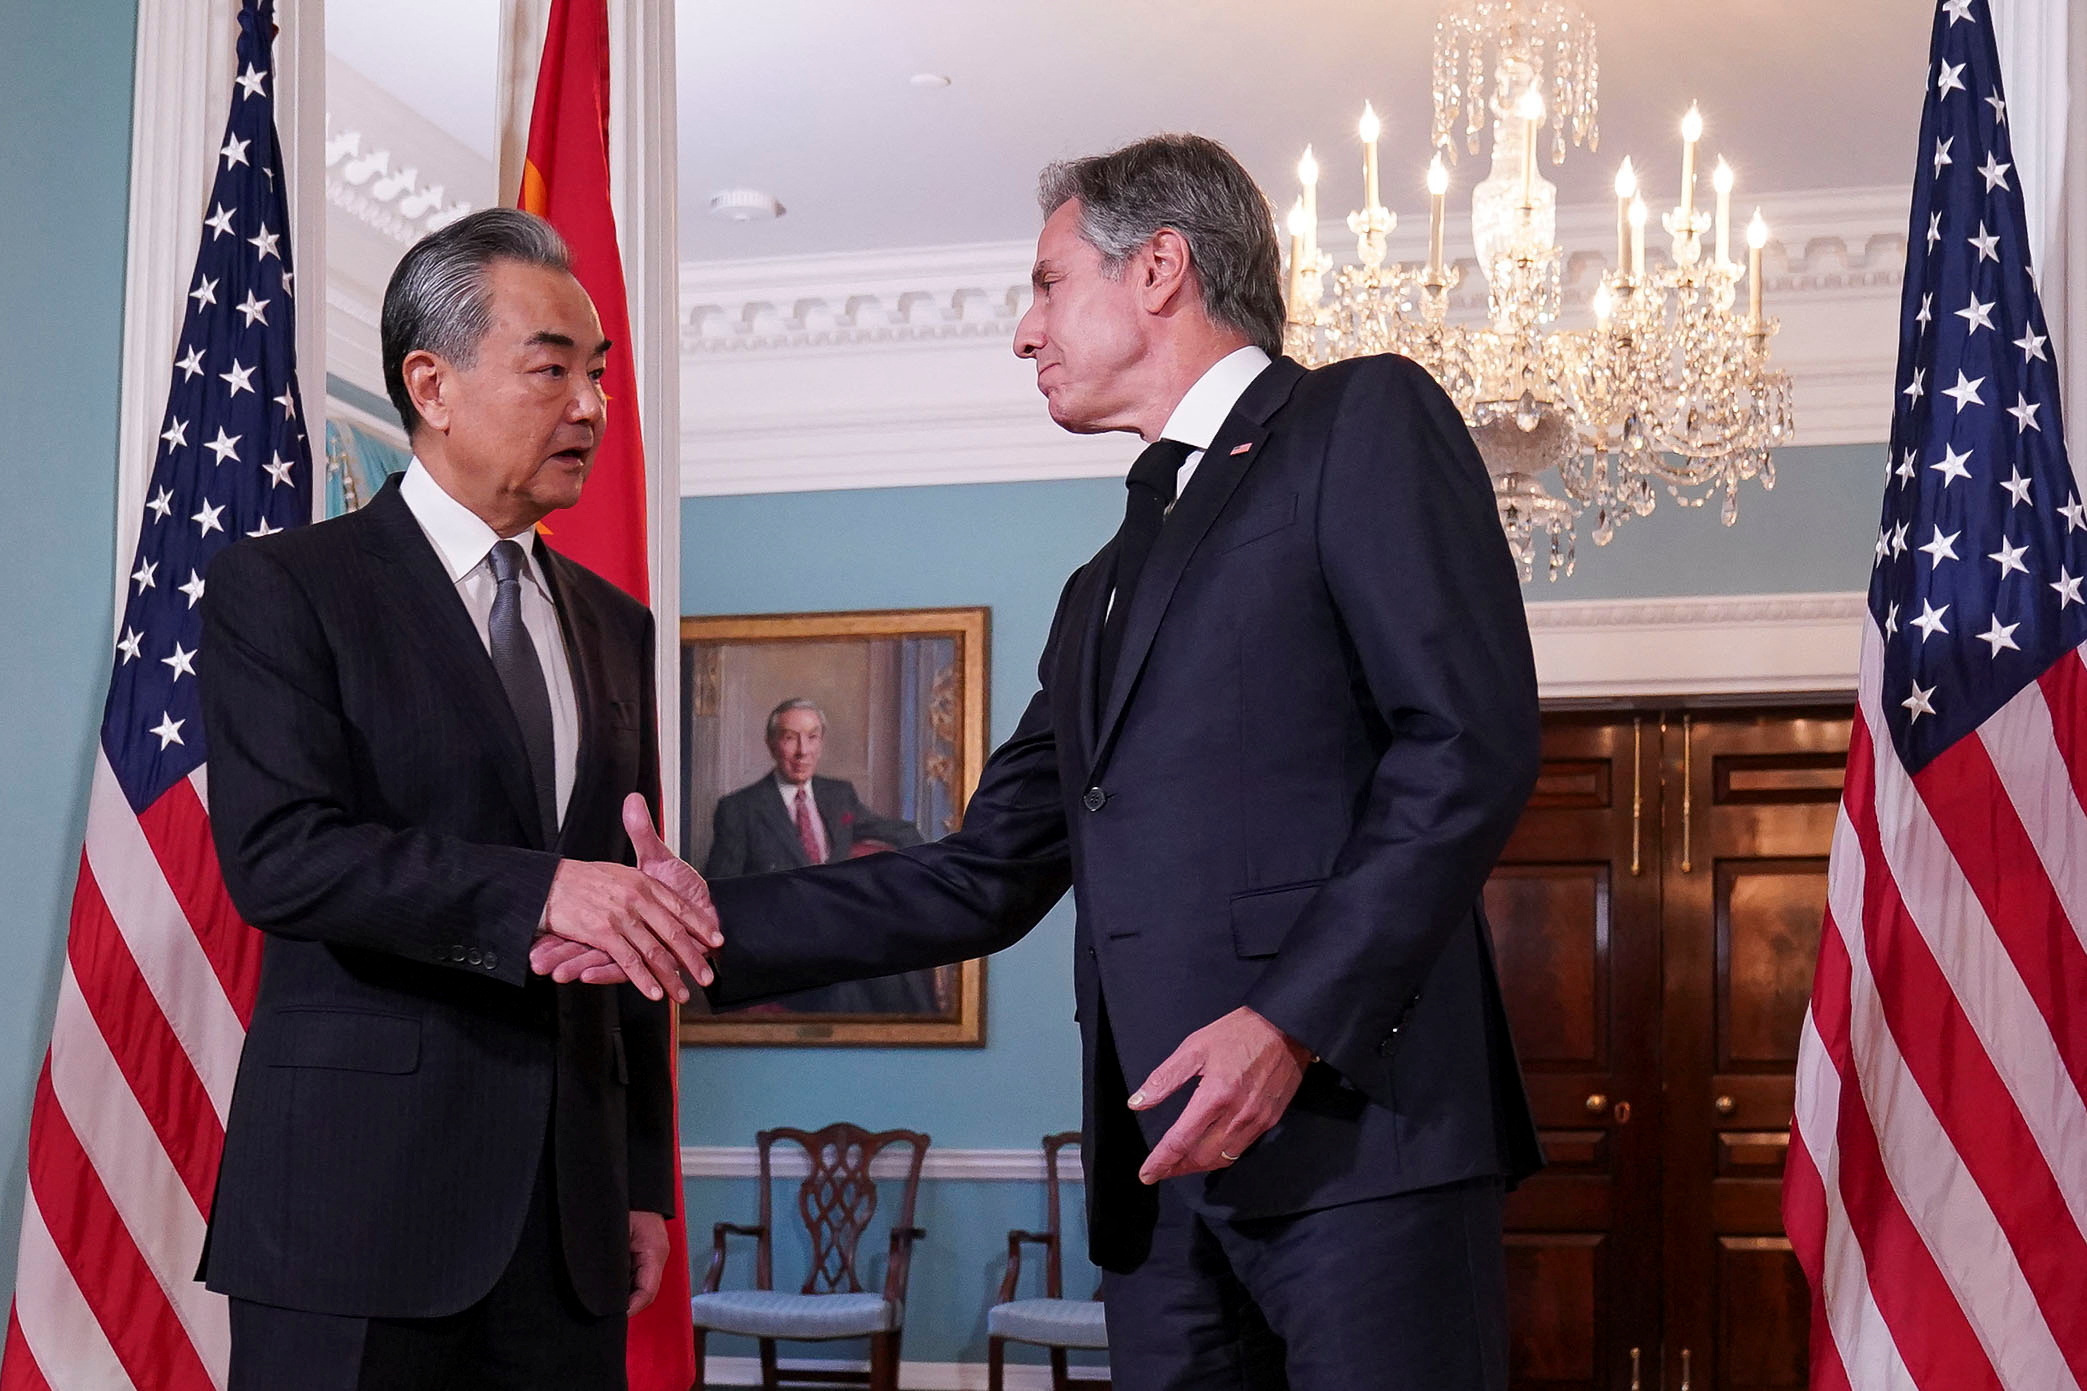 U.S. Secretary of State Blinken meets with Chinese Foreign Minister Wang Yi in Washington